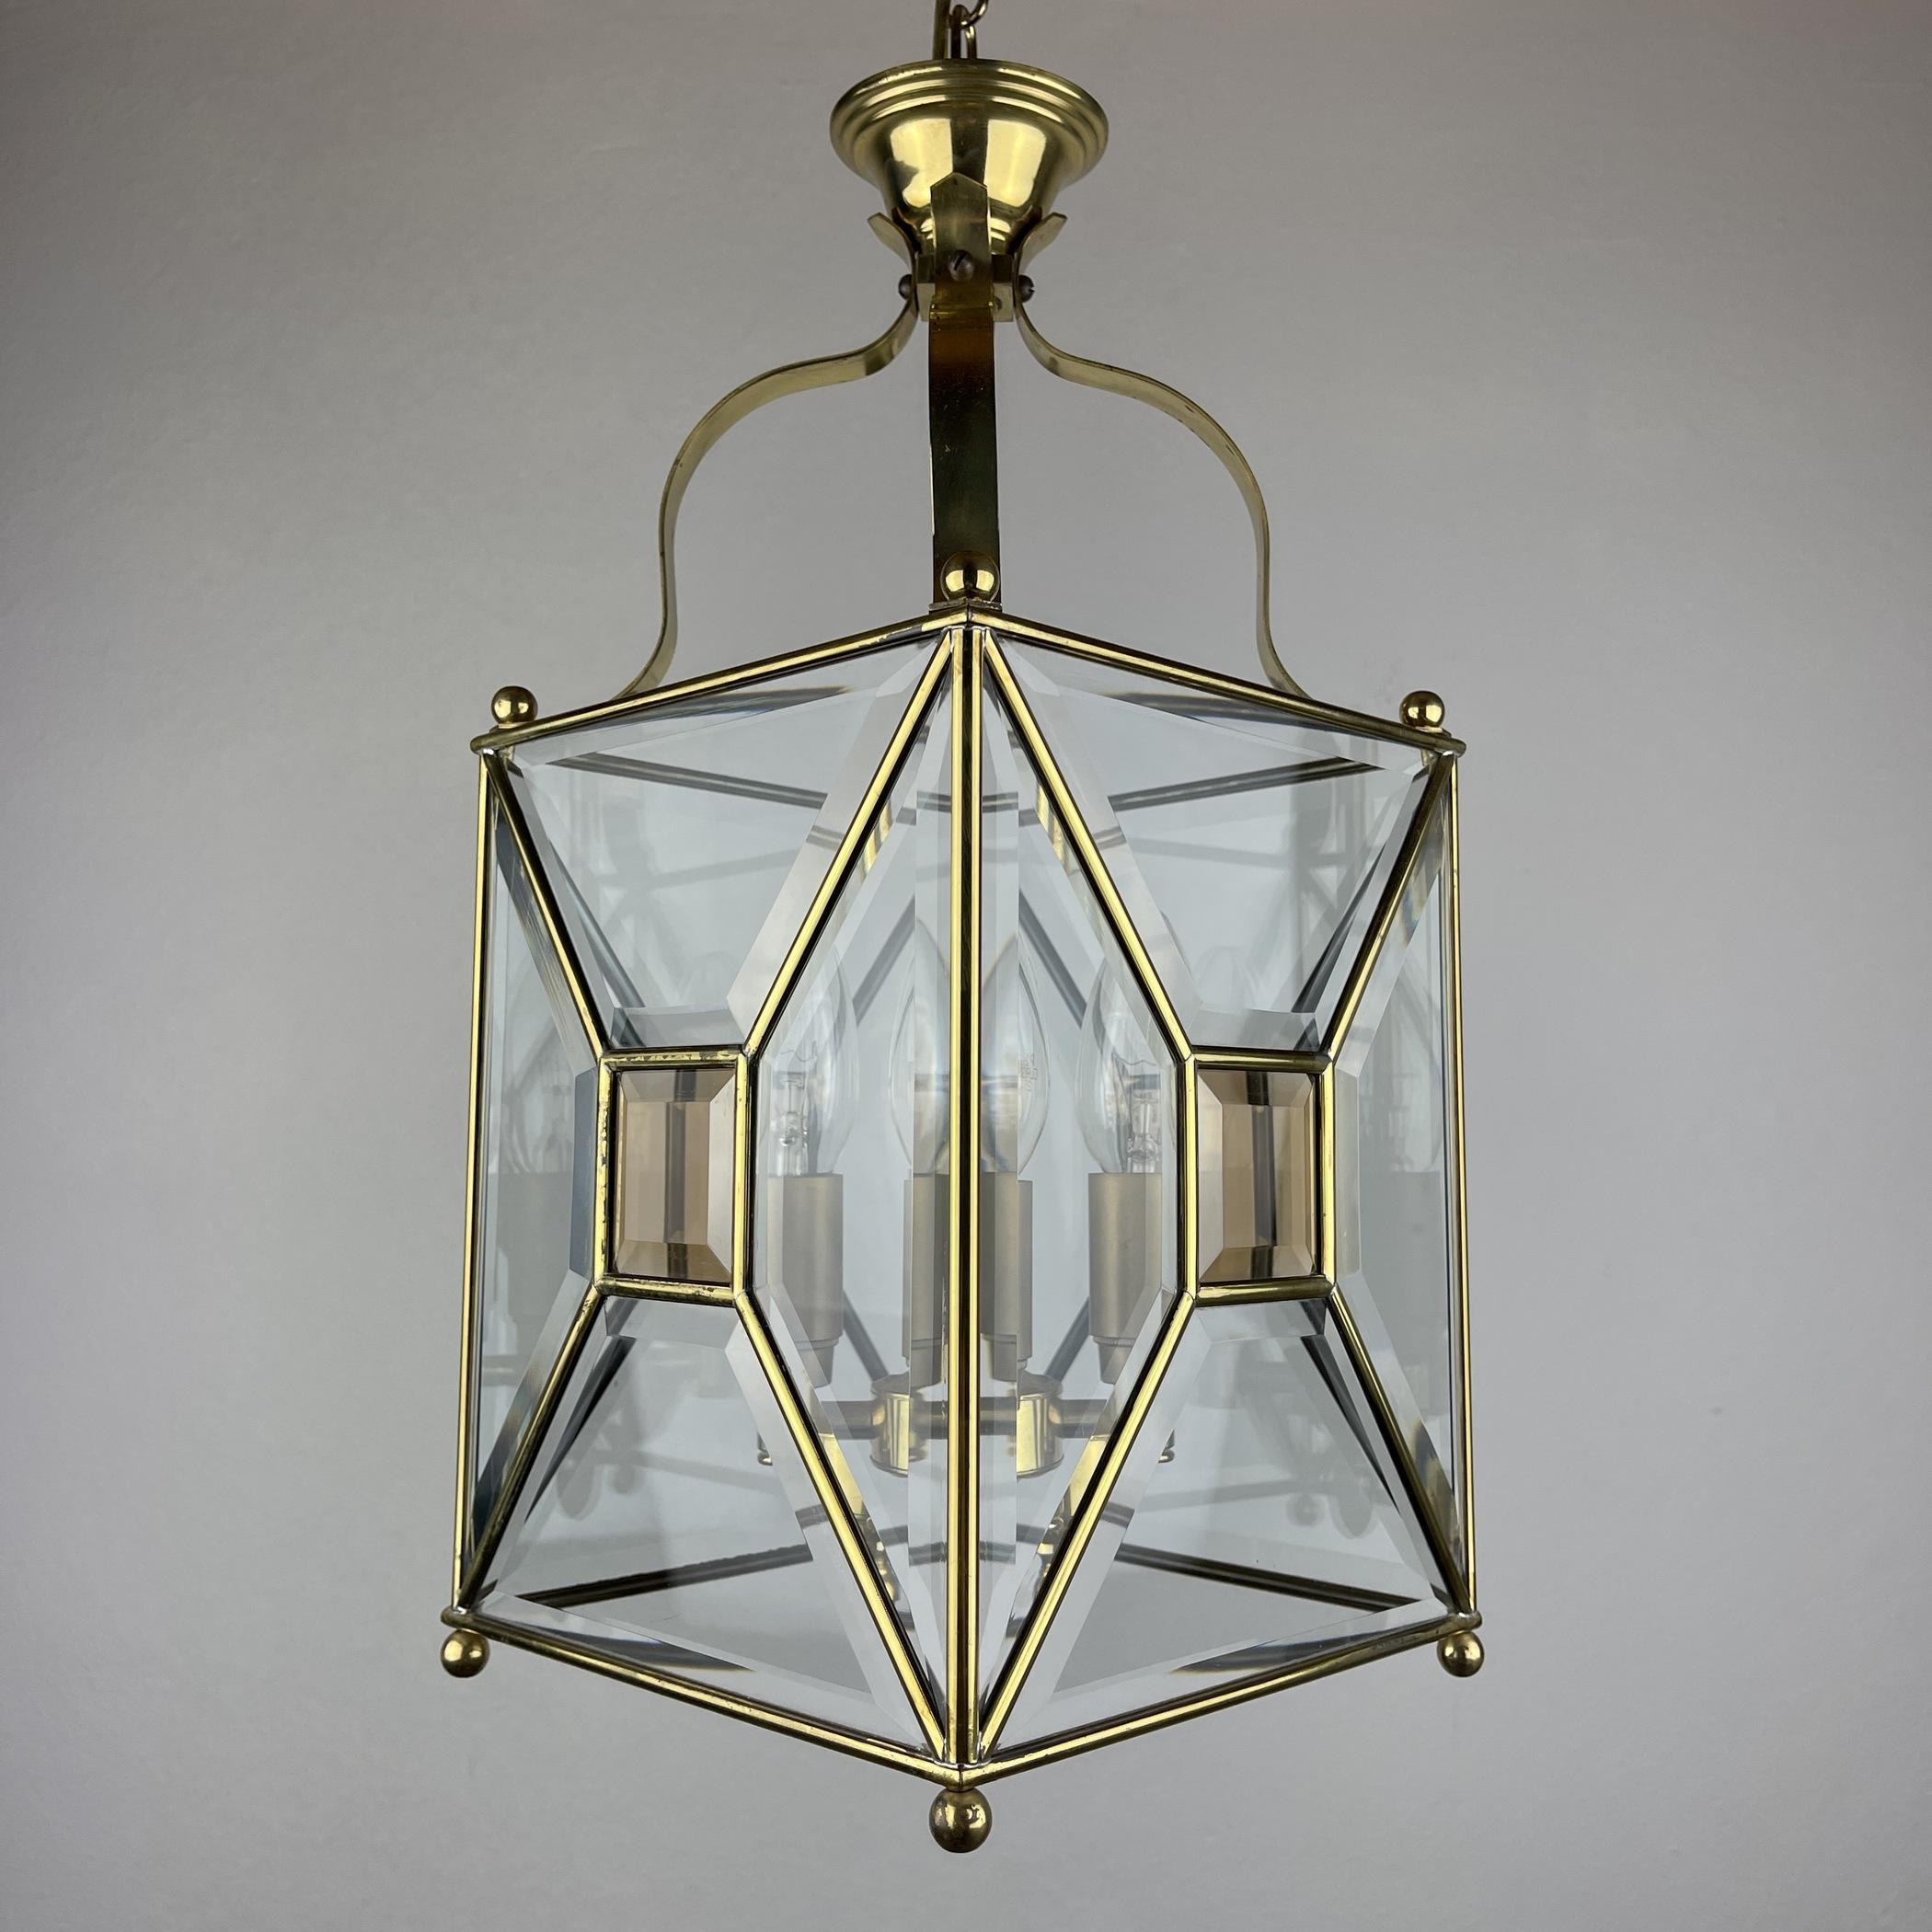 Vintage pendant lamp Italy '60s Brass Polished Glass Retro lighting Mid-century  For Sale 6